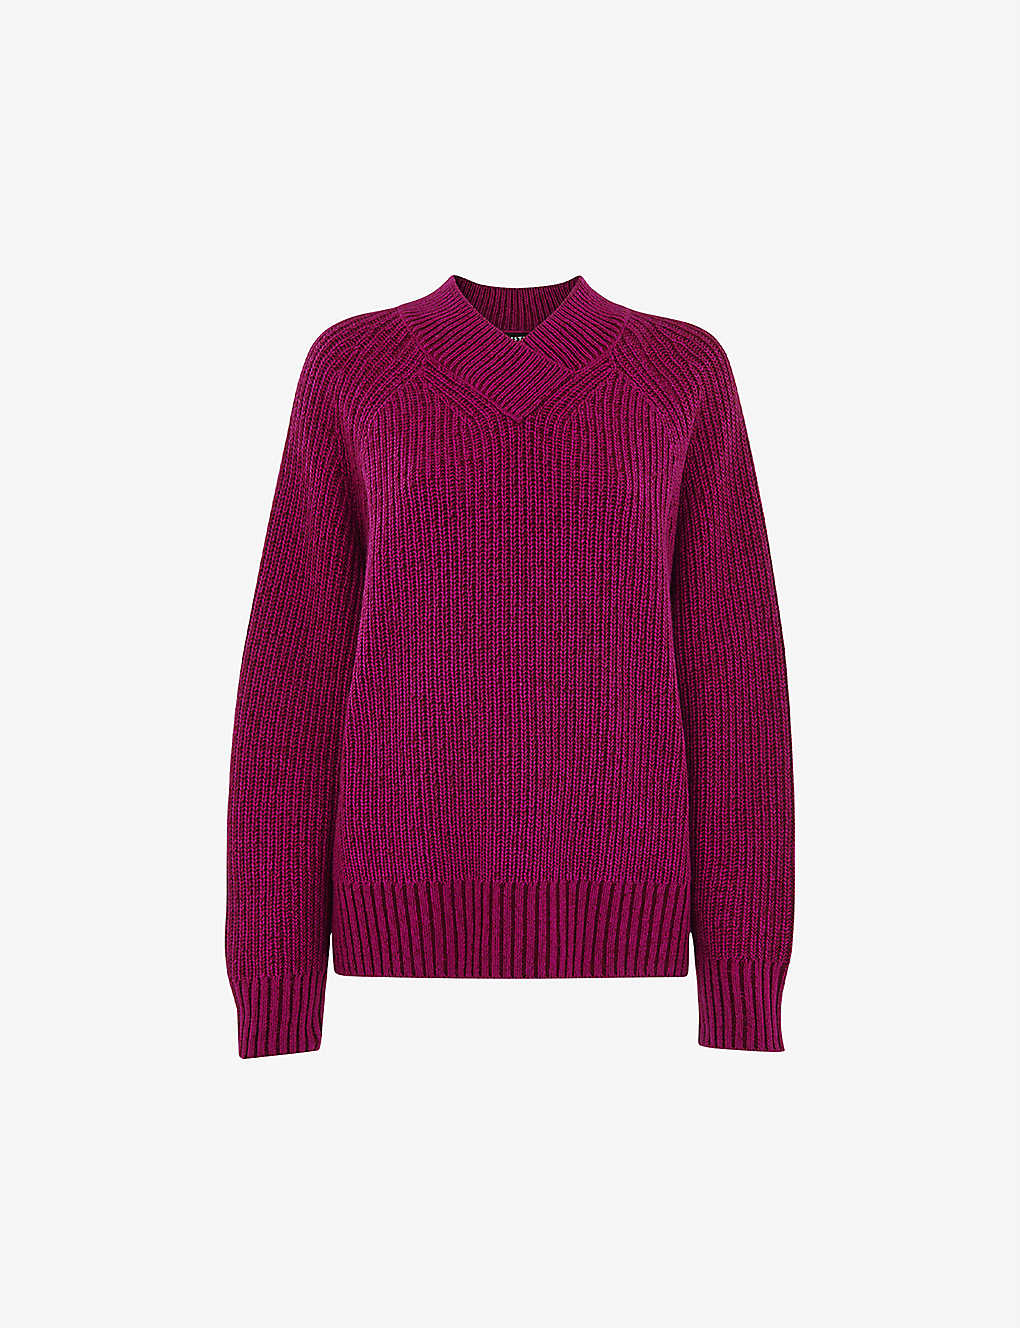 Whistles Womens Pink Ribbed Knitted Jumper